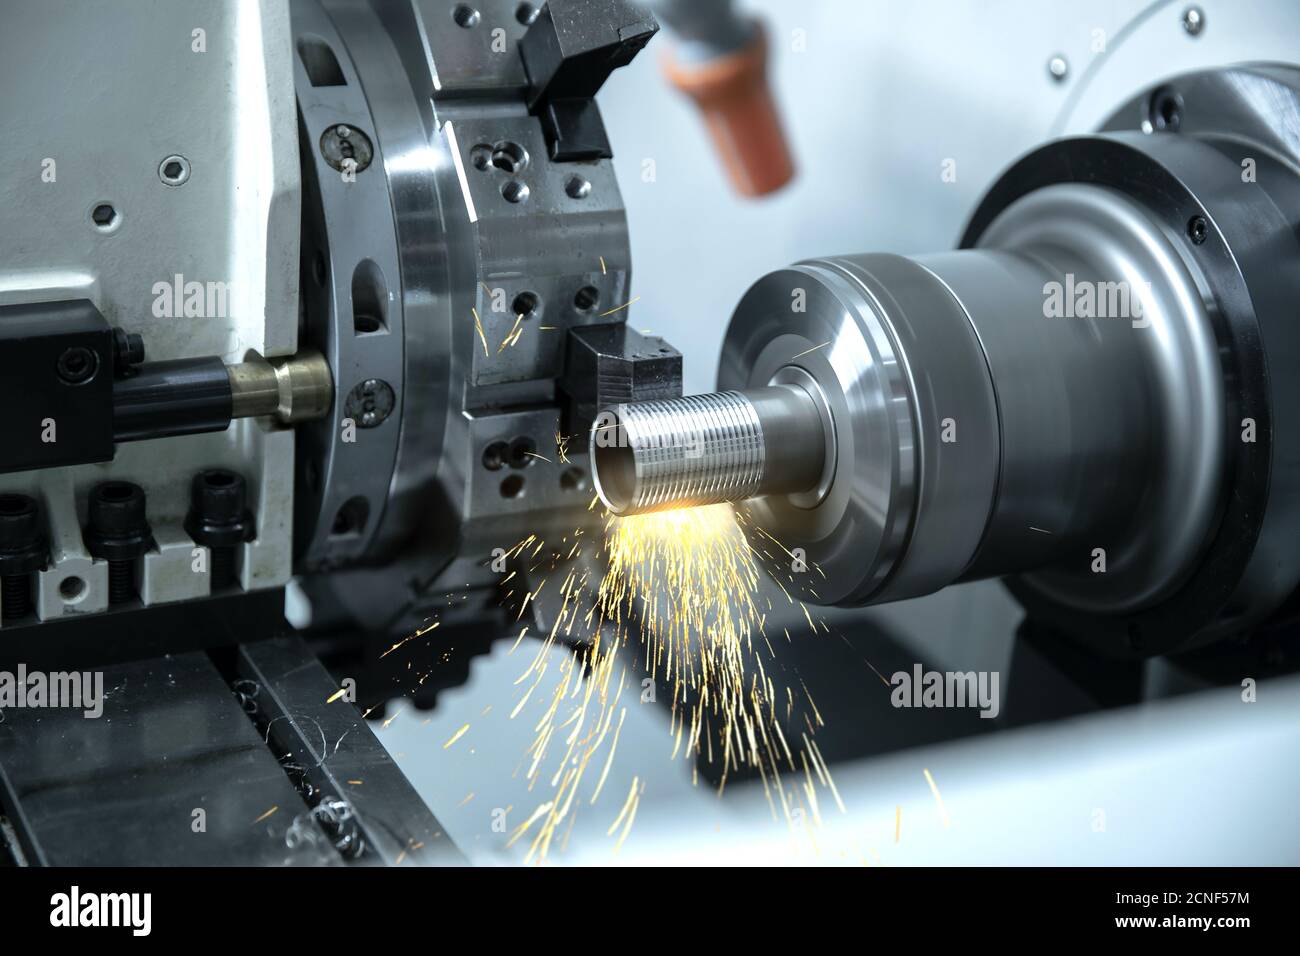 Cutting tool metalworking in manufacturing process by machining. Stock Photo